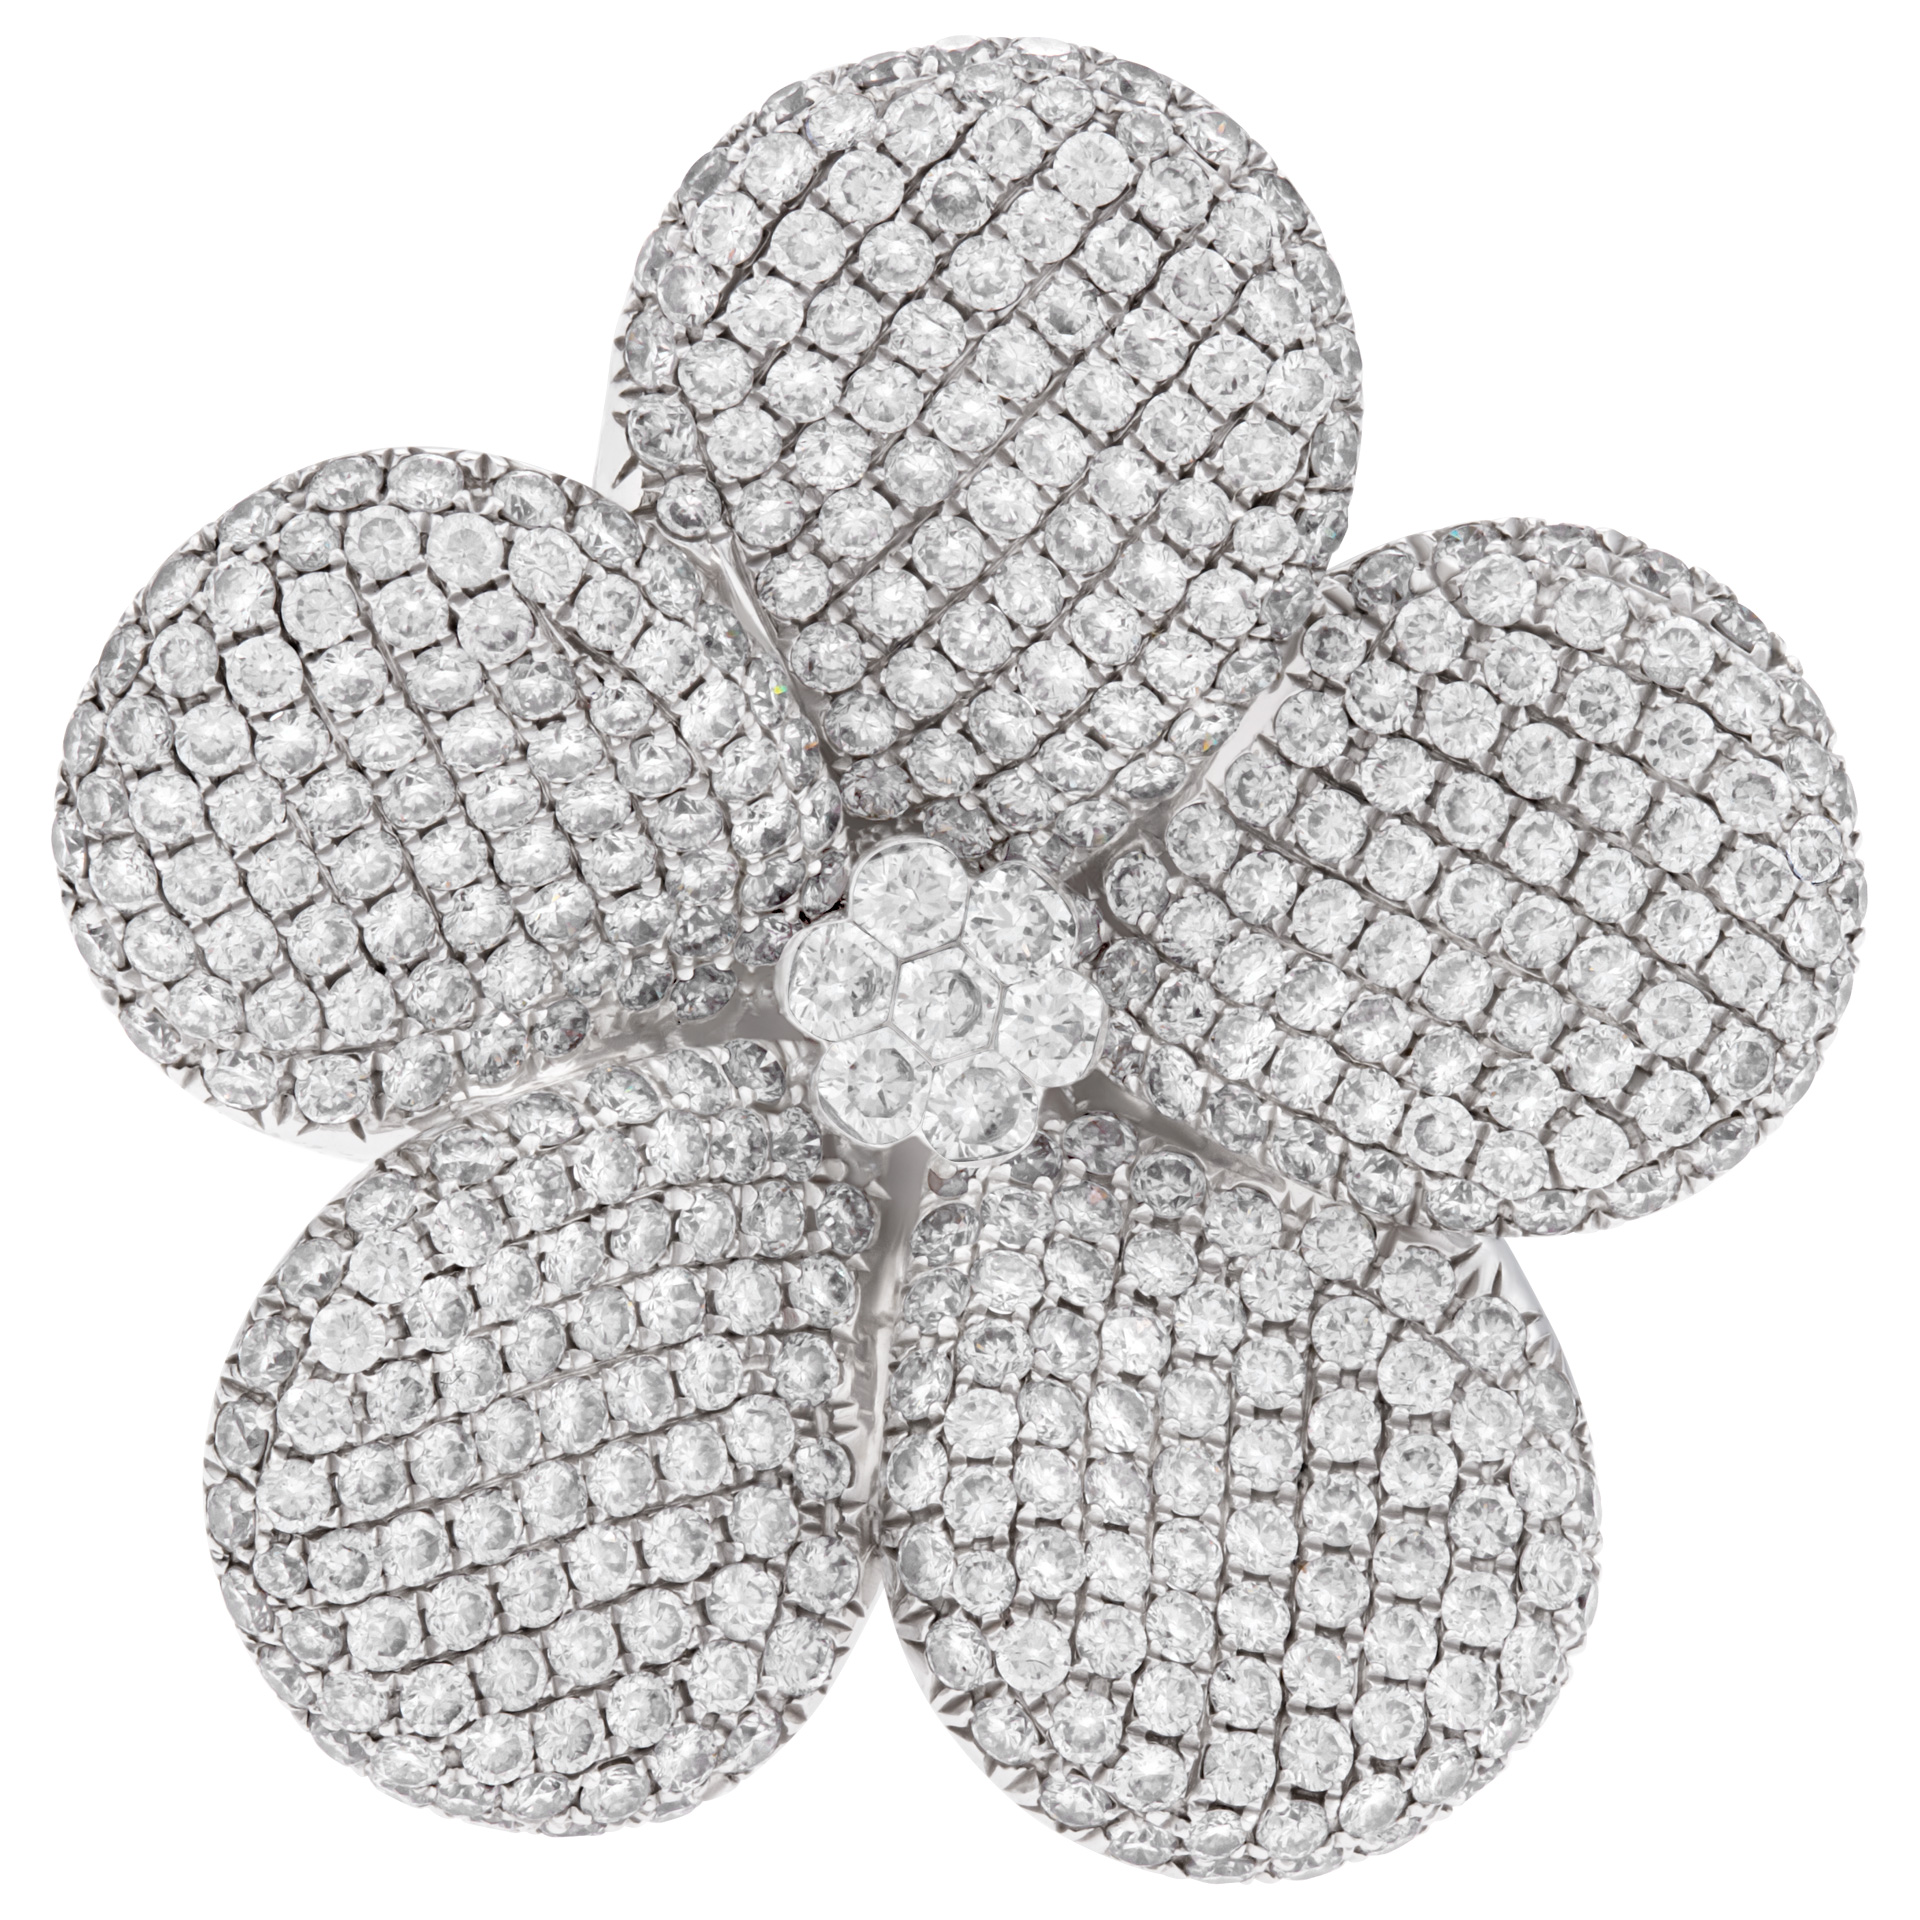 Pave diamond flower ring in 18k white gold w/ approx. 4.92 carats in round white diamonds